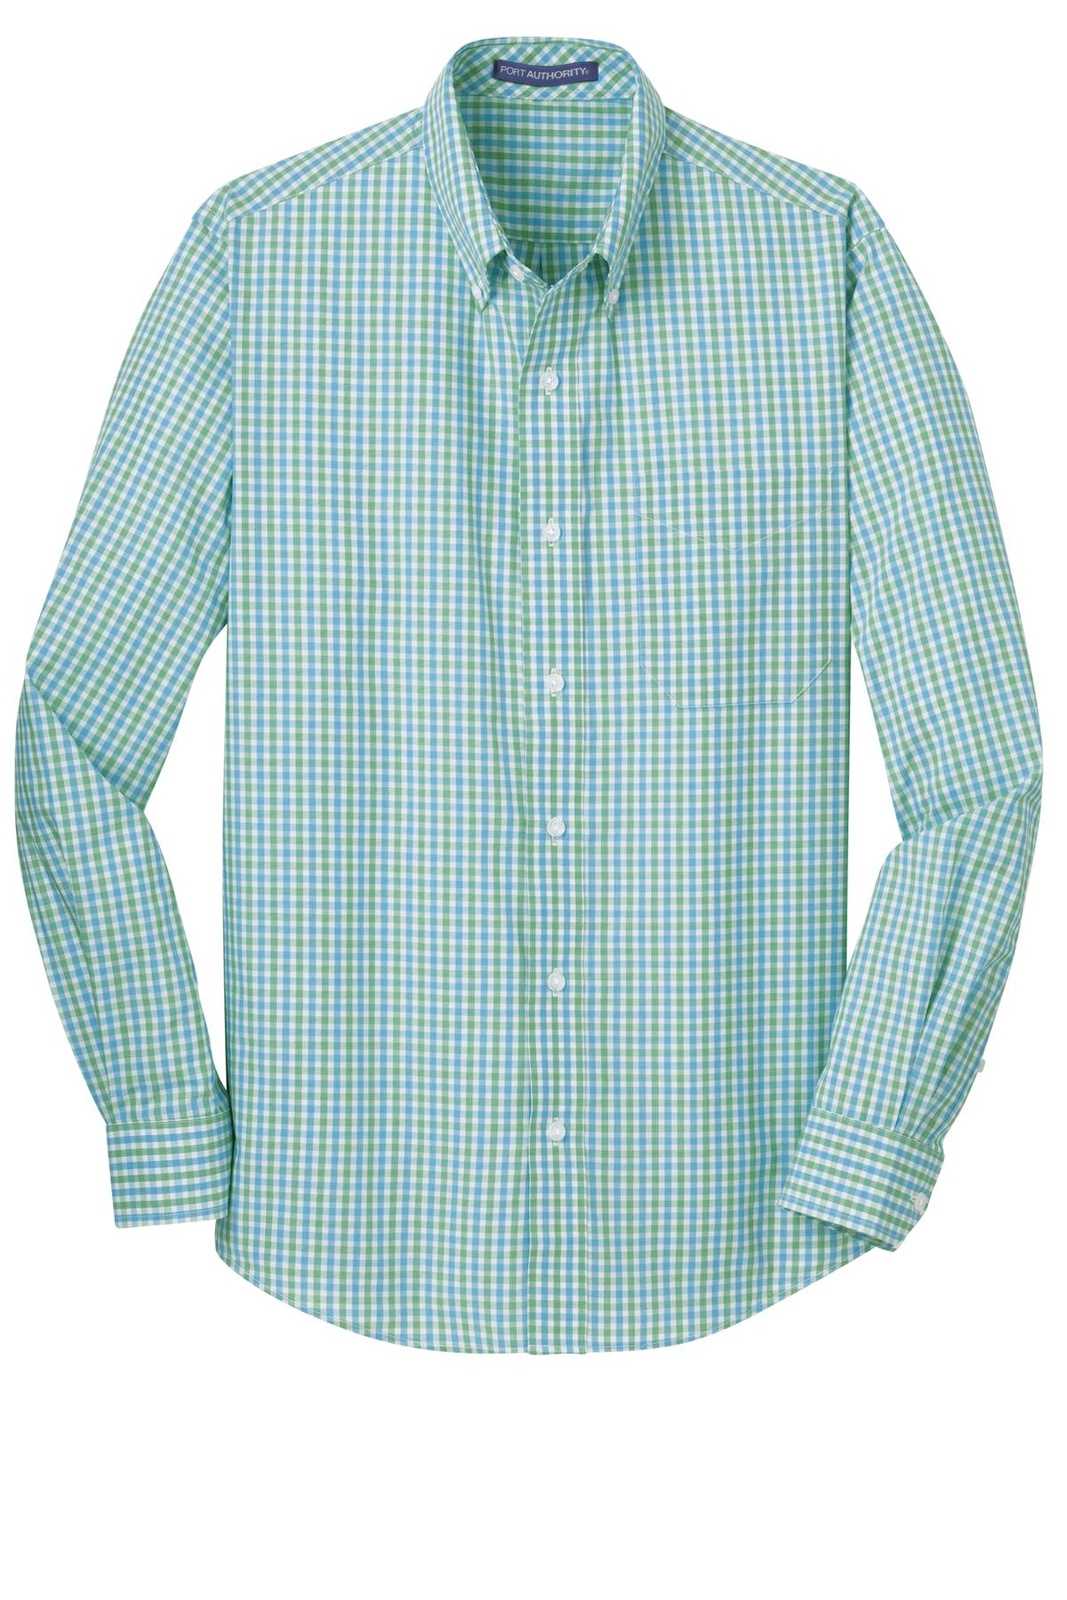 Port Authority S654 Long Sleeve Gingham Easy Care Shirt - Green Aqua - HIT a Double - 5